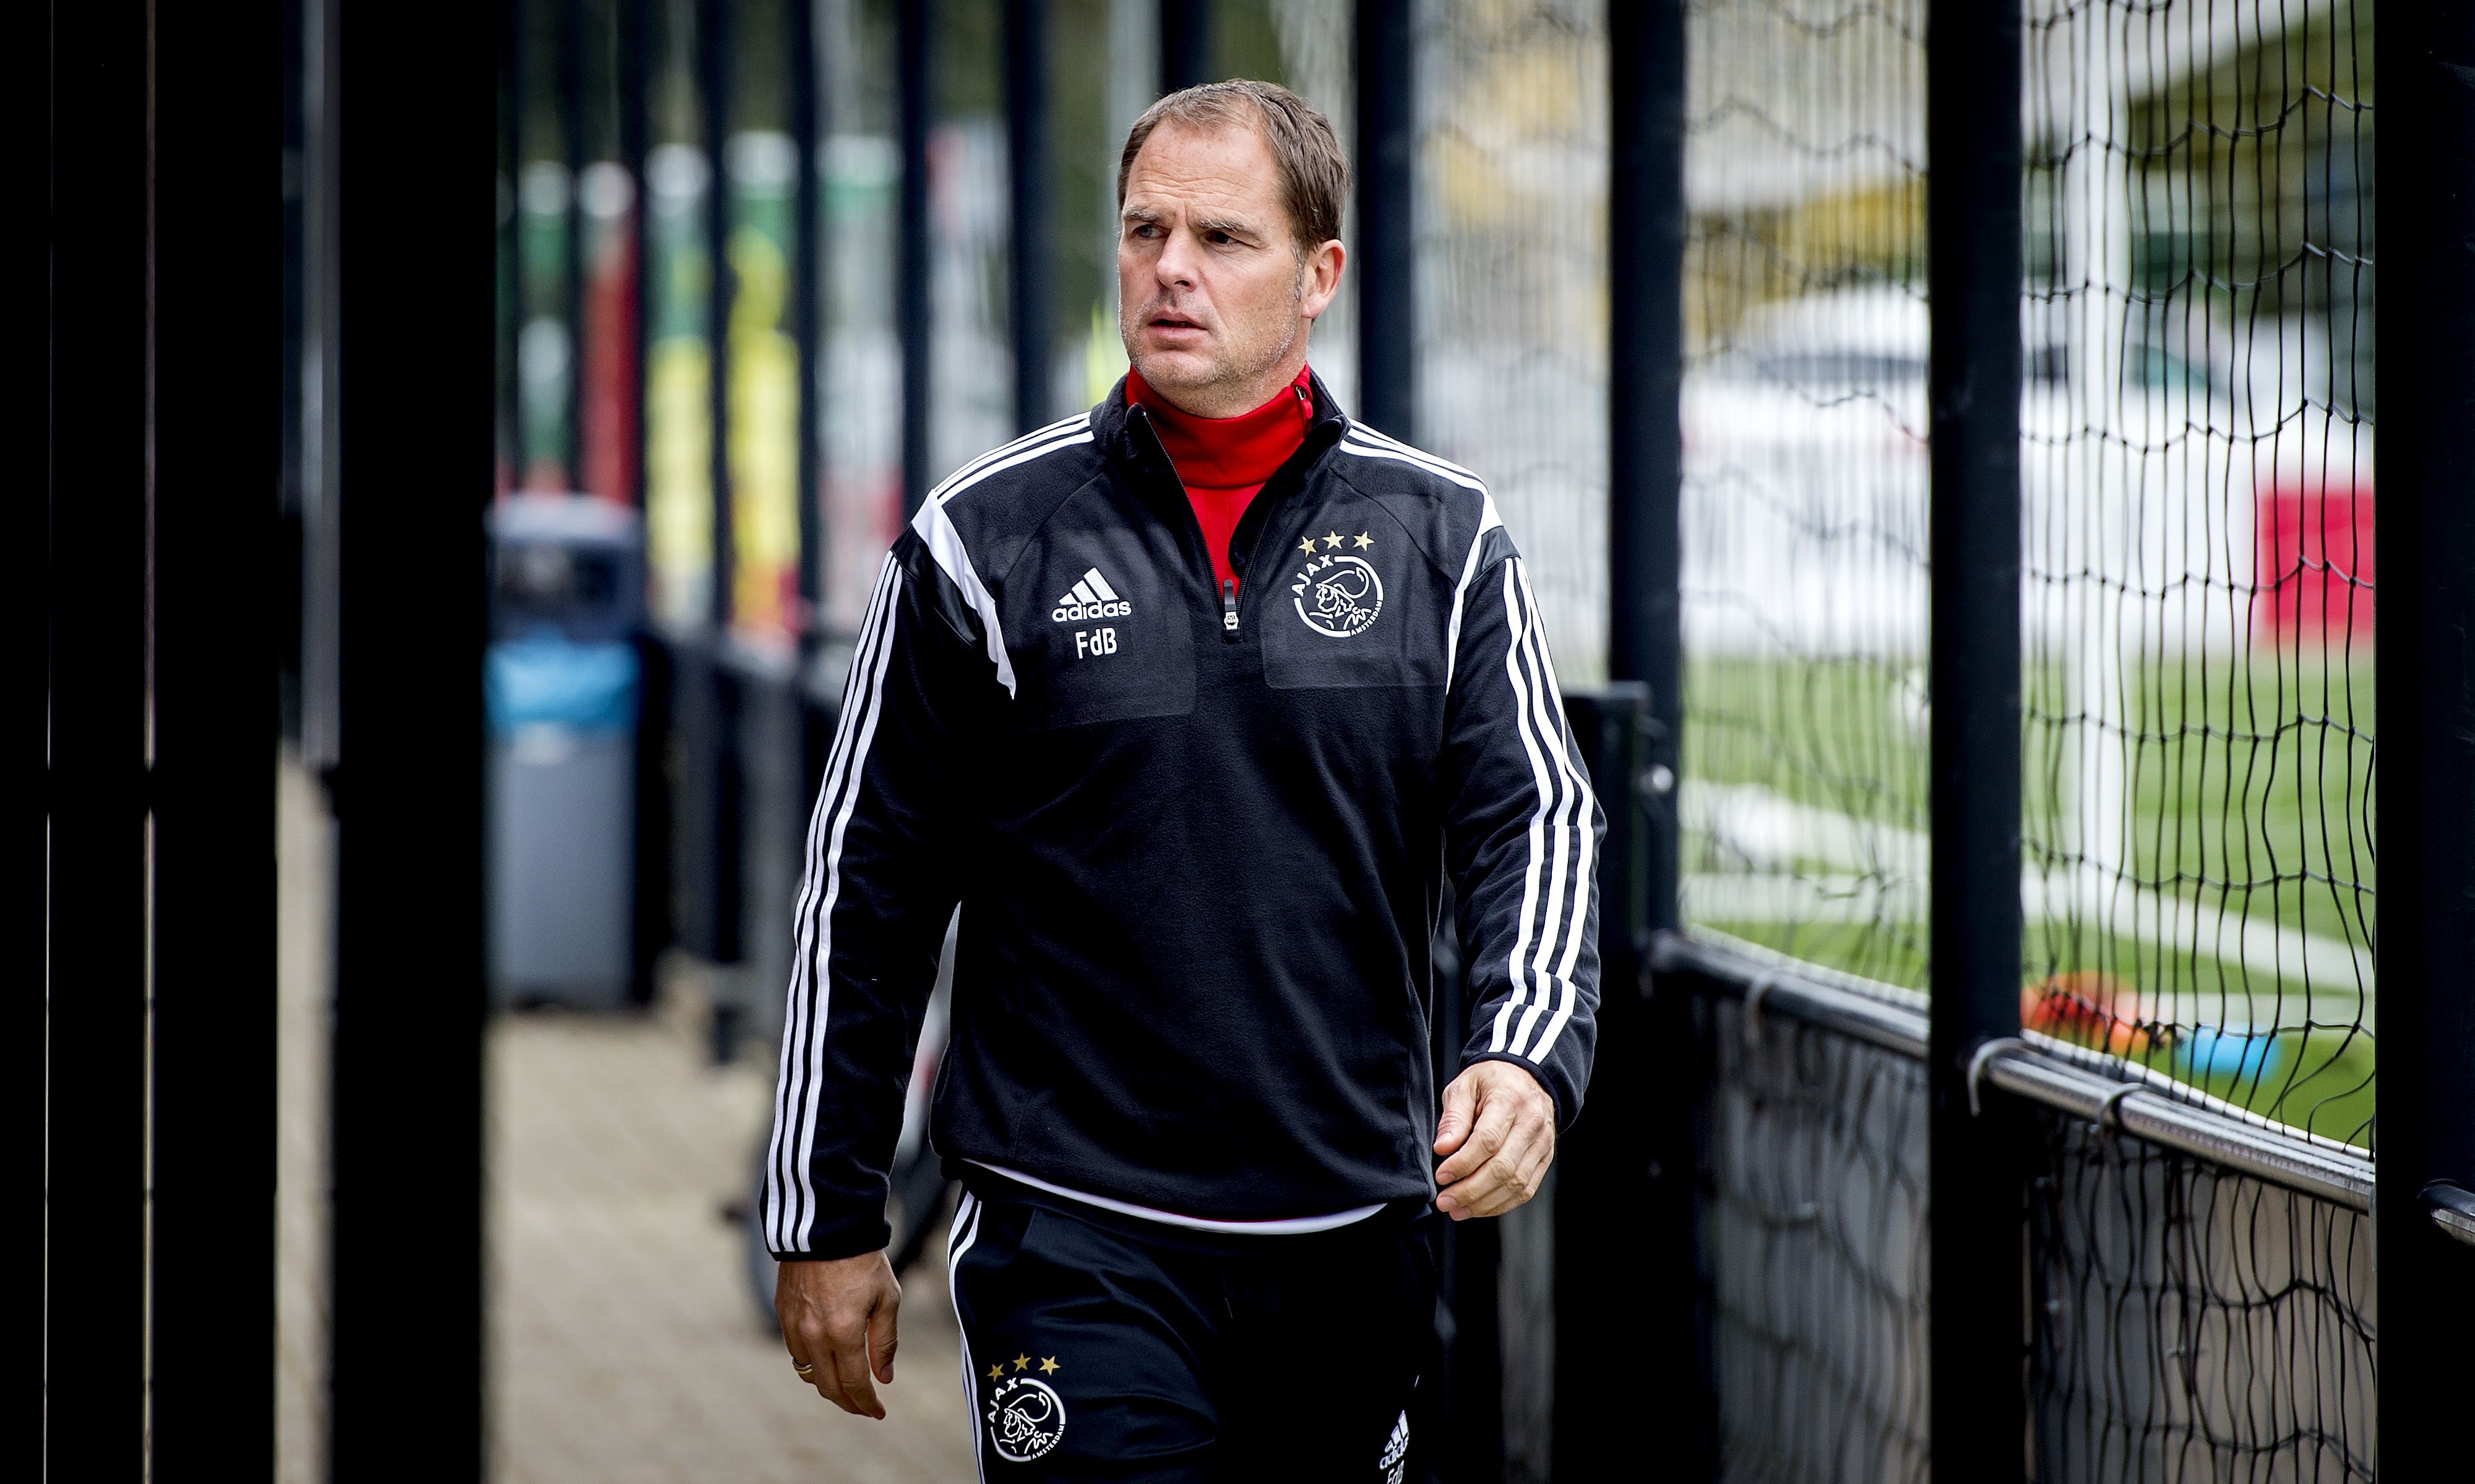 De Boer: “Tonight was not our night; there is much to improve”